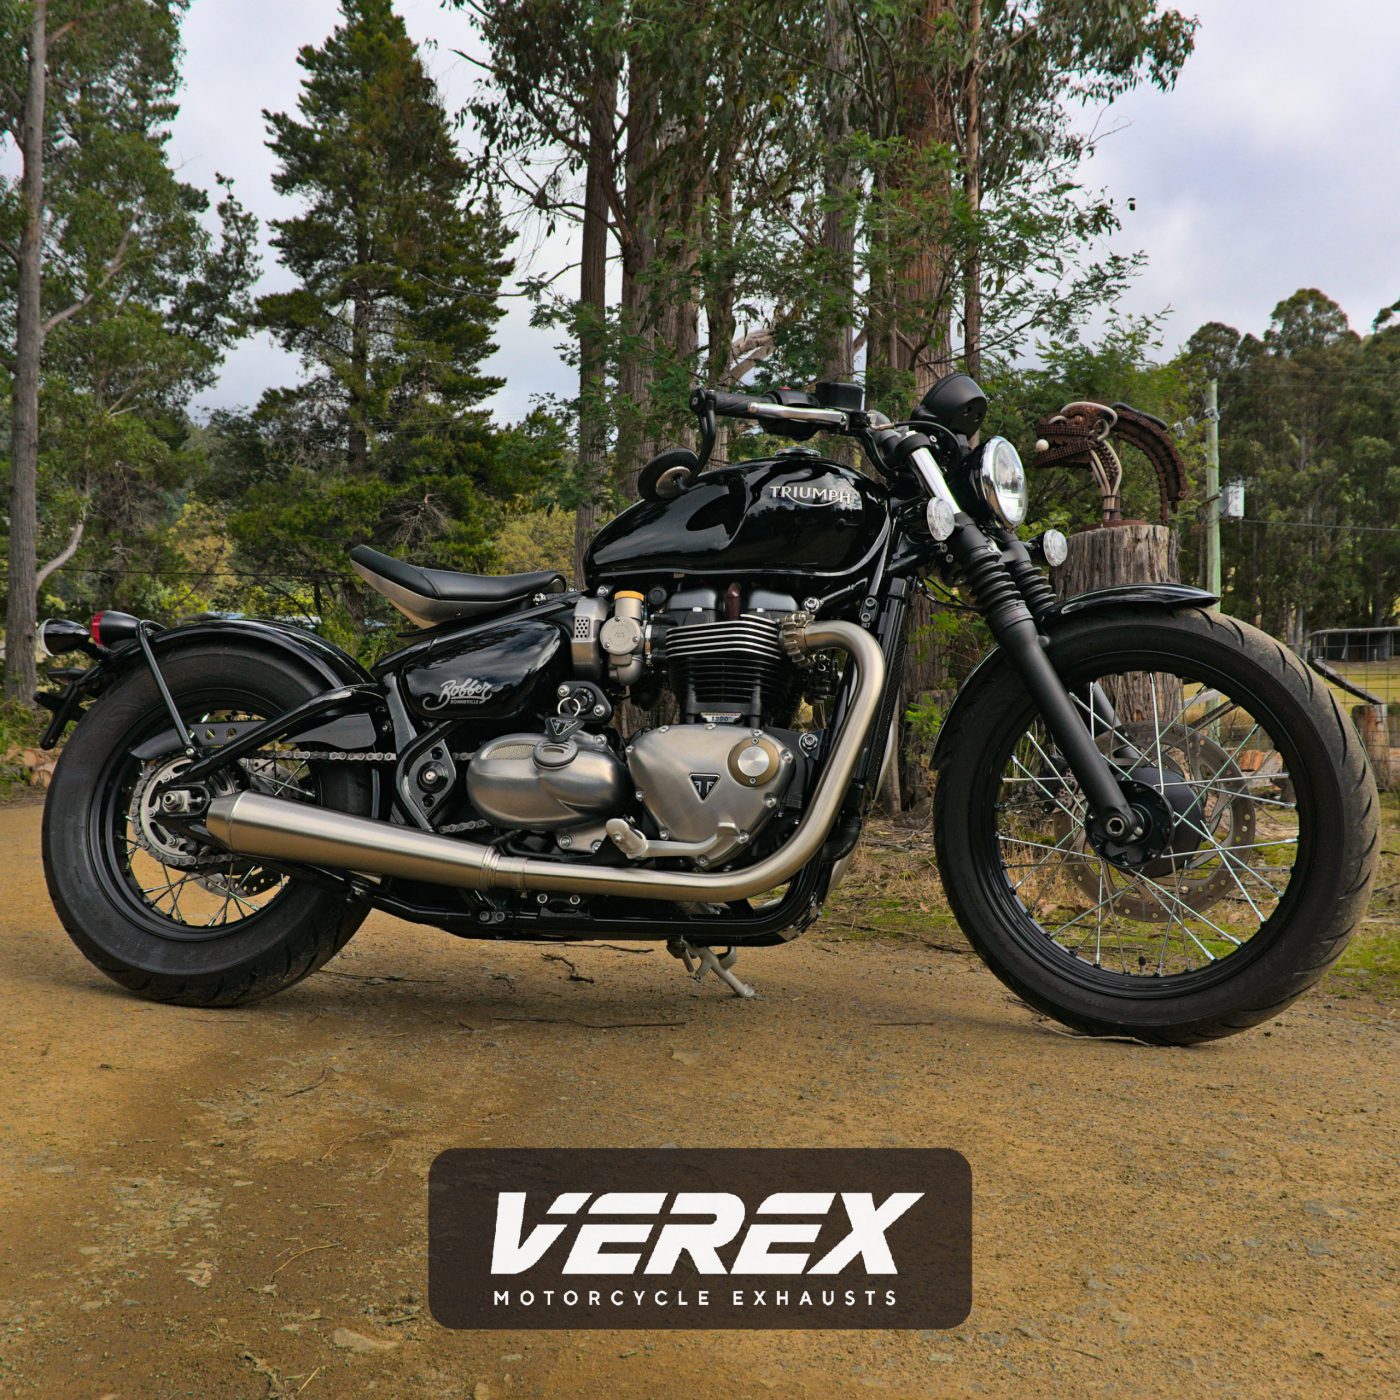 Australian made Triumph Bobber Full System Motorcycle Exhaust